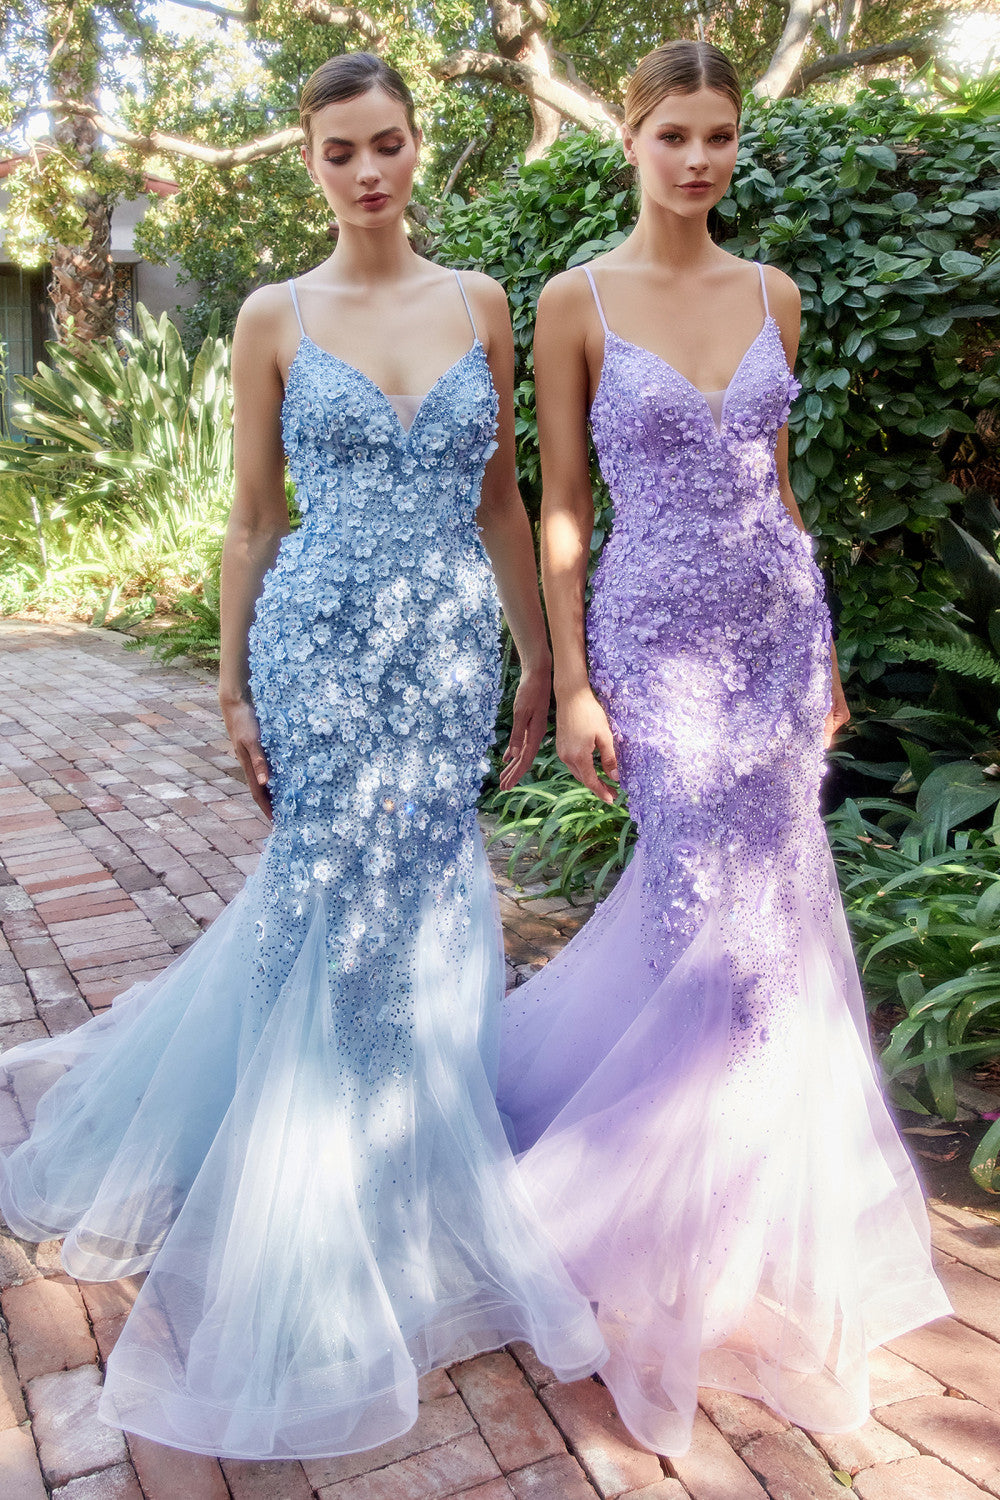 Blue-Lavender Floral Chromatic Mermaid Gown A1201 - Special Occasion